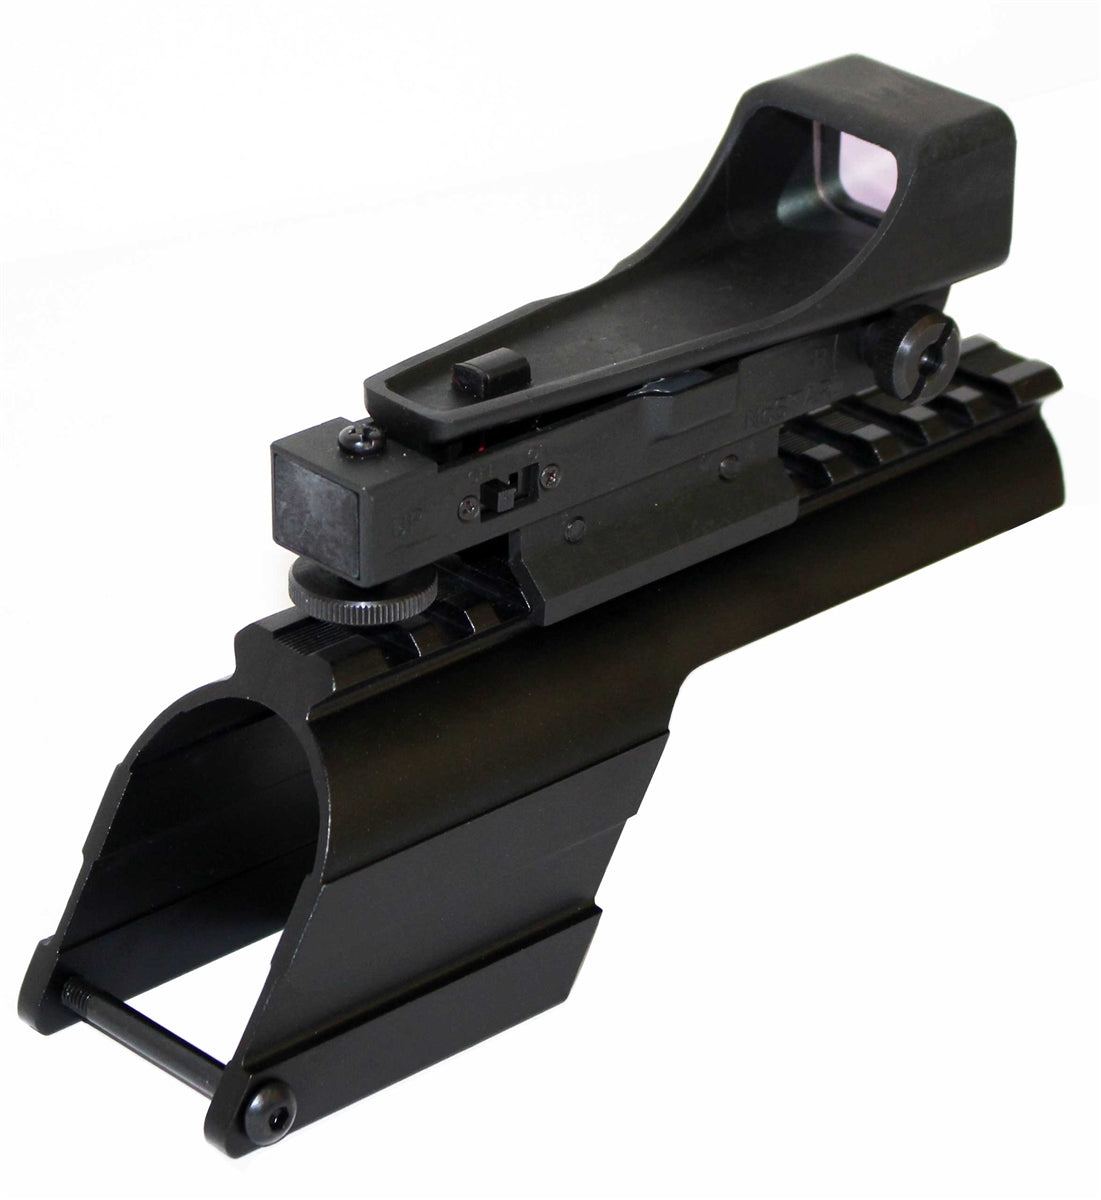 Trinity Saddle Picatinny mount Adapter With Red Dot Reflex Sight For Mossberg Maverick 88 12 Gauge Pump.